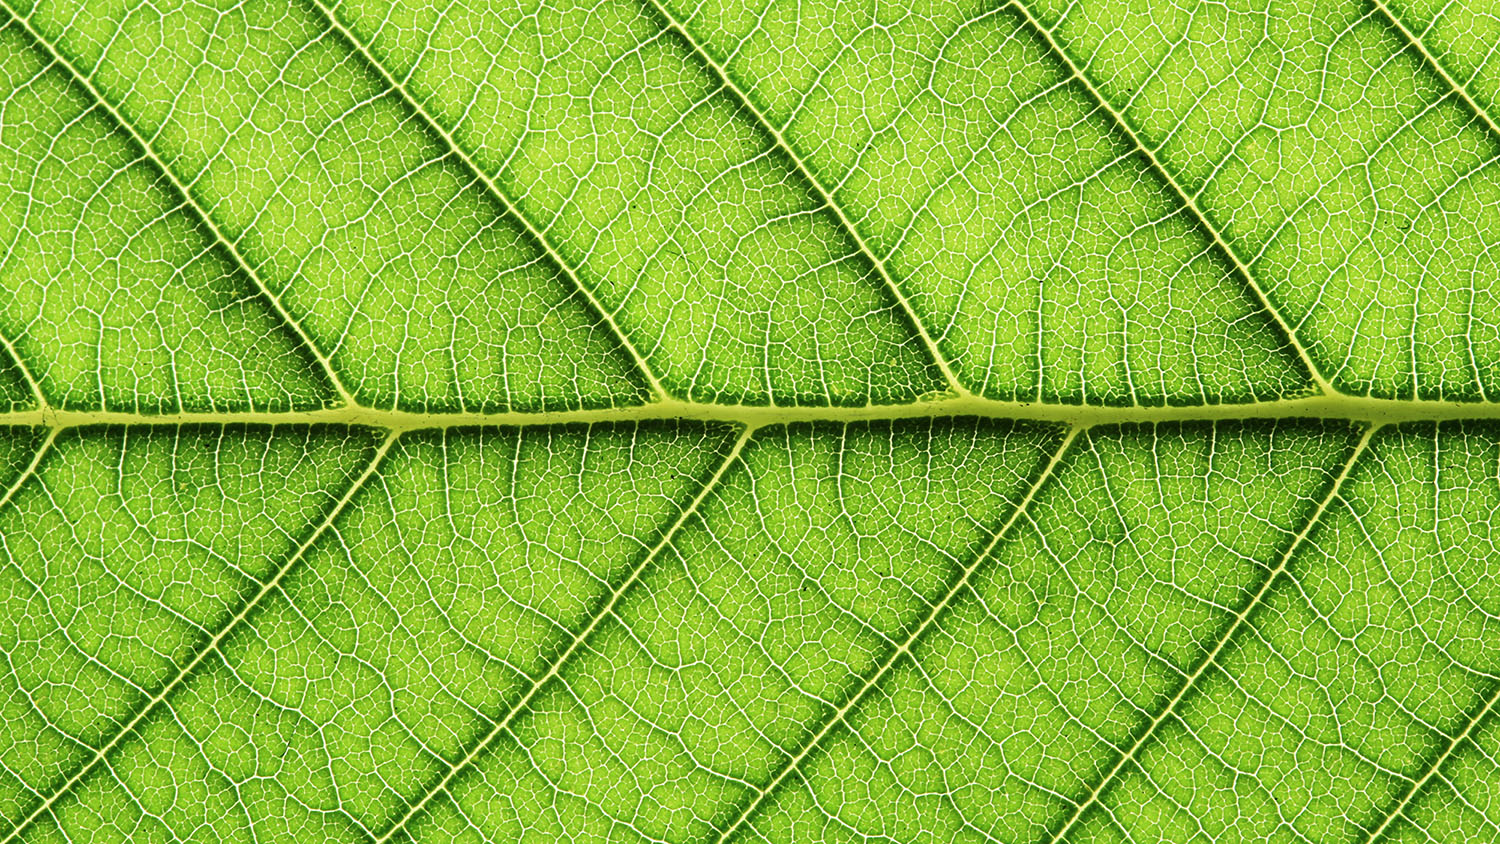 Close up of a leaf, showing the structure